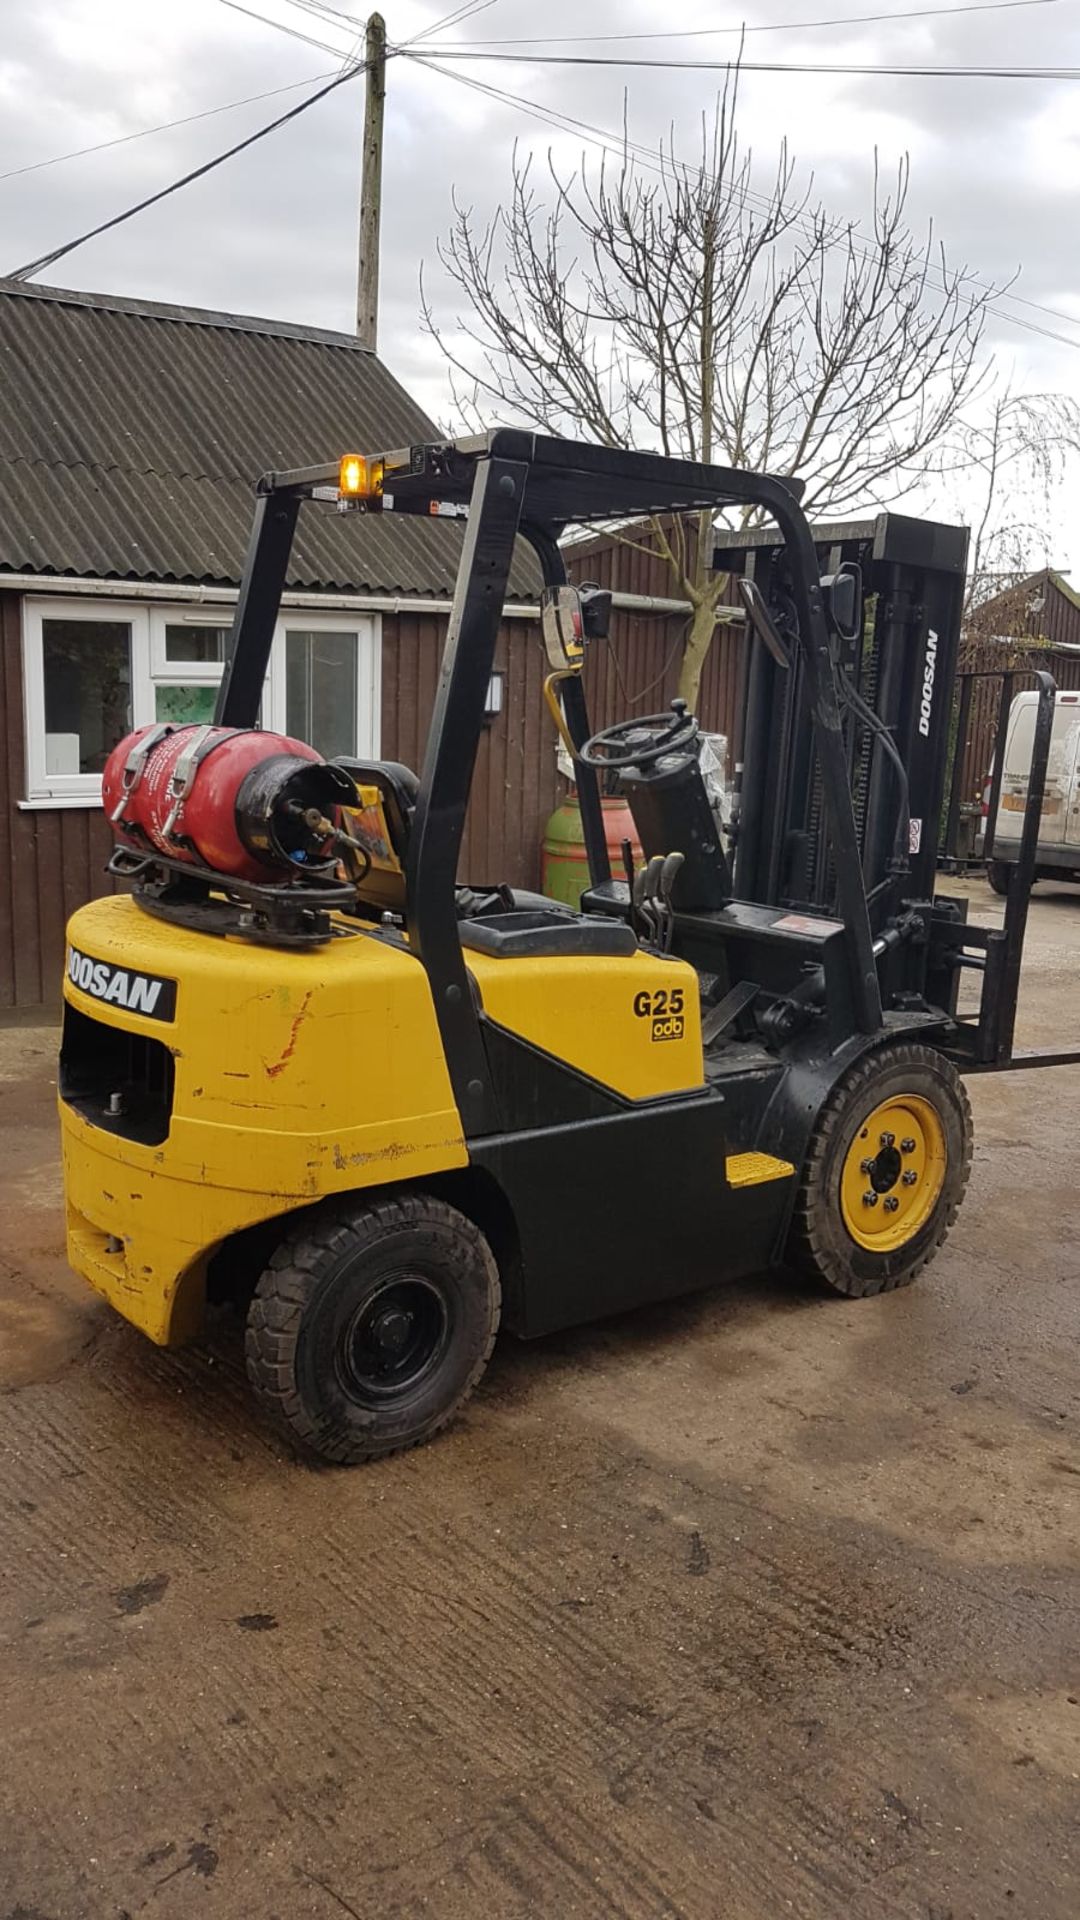 DAEWOO G25 GAS POWERED FORKLIFT TRUCK, 3 STAGE TRIPLE MAST, SIDE SHIFT, 2.5 TONNE RATED CAPACITY. - Image 2 of 4